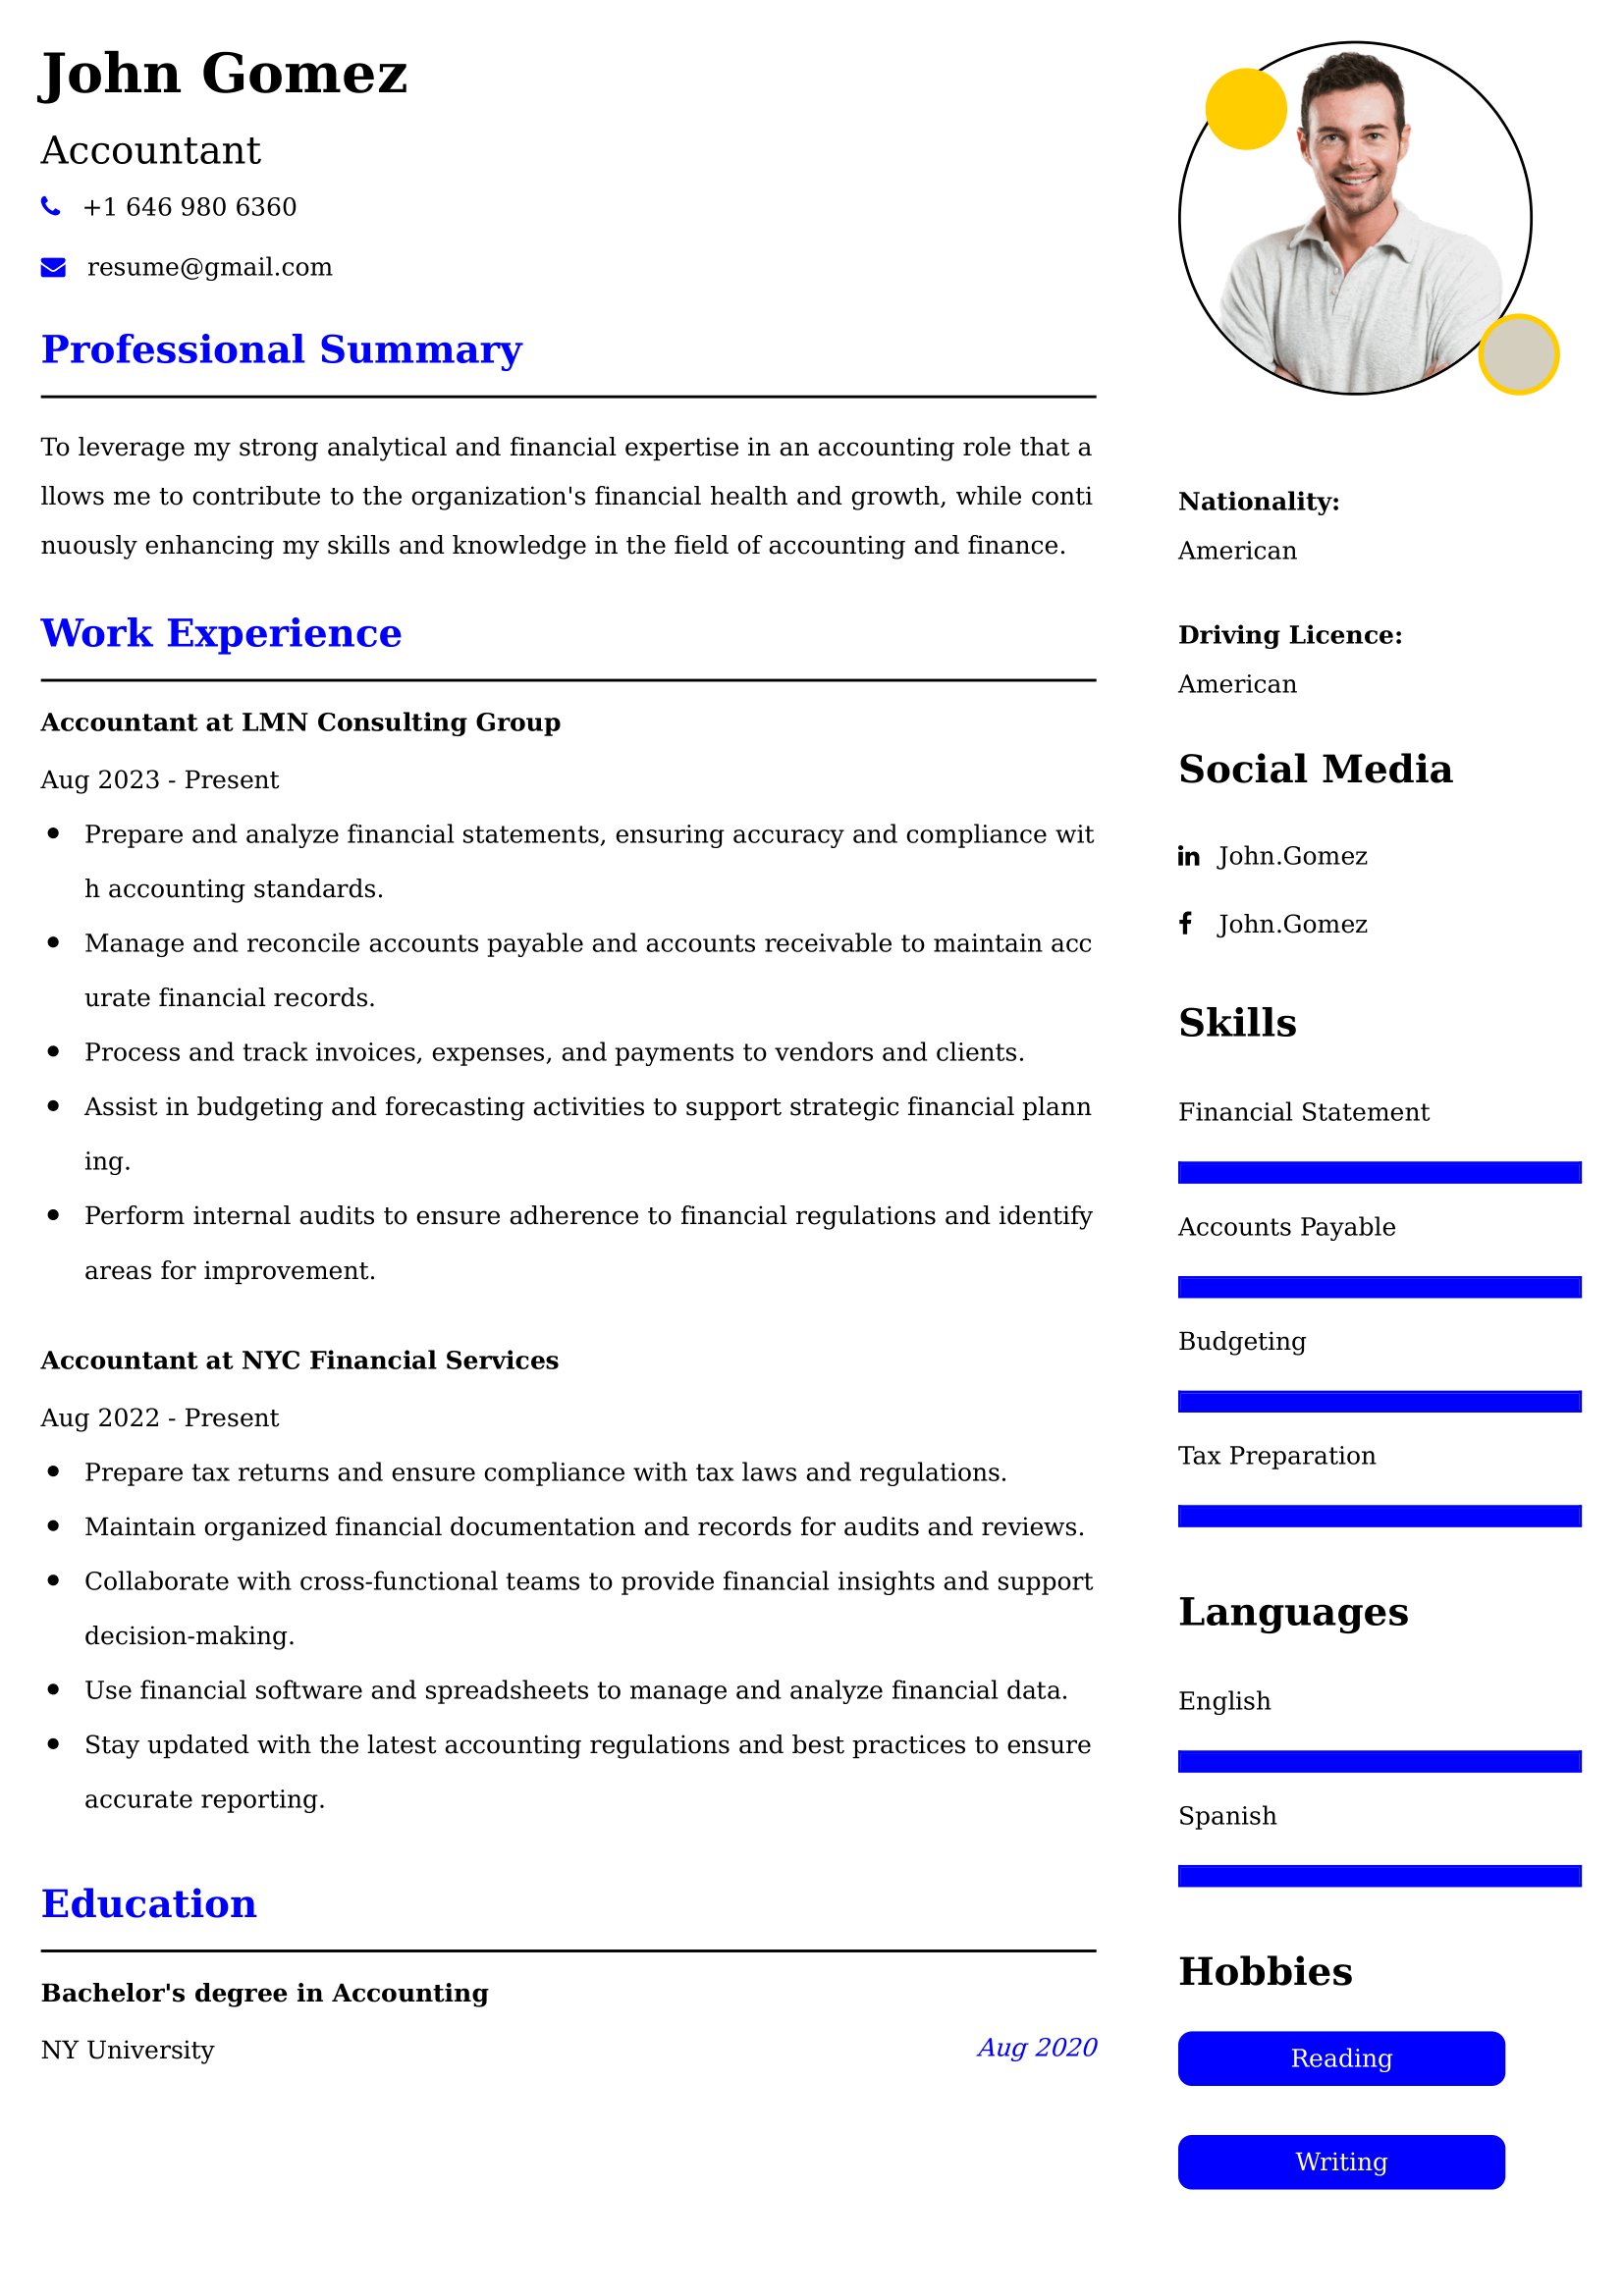 75+ Professional Accounting Resume Examples, Latest Format